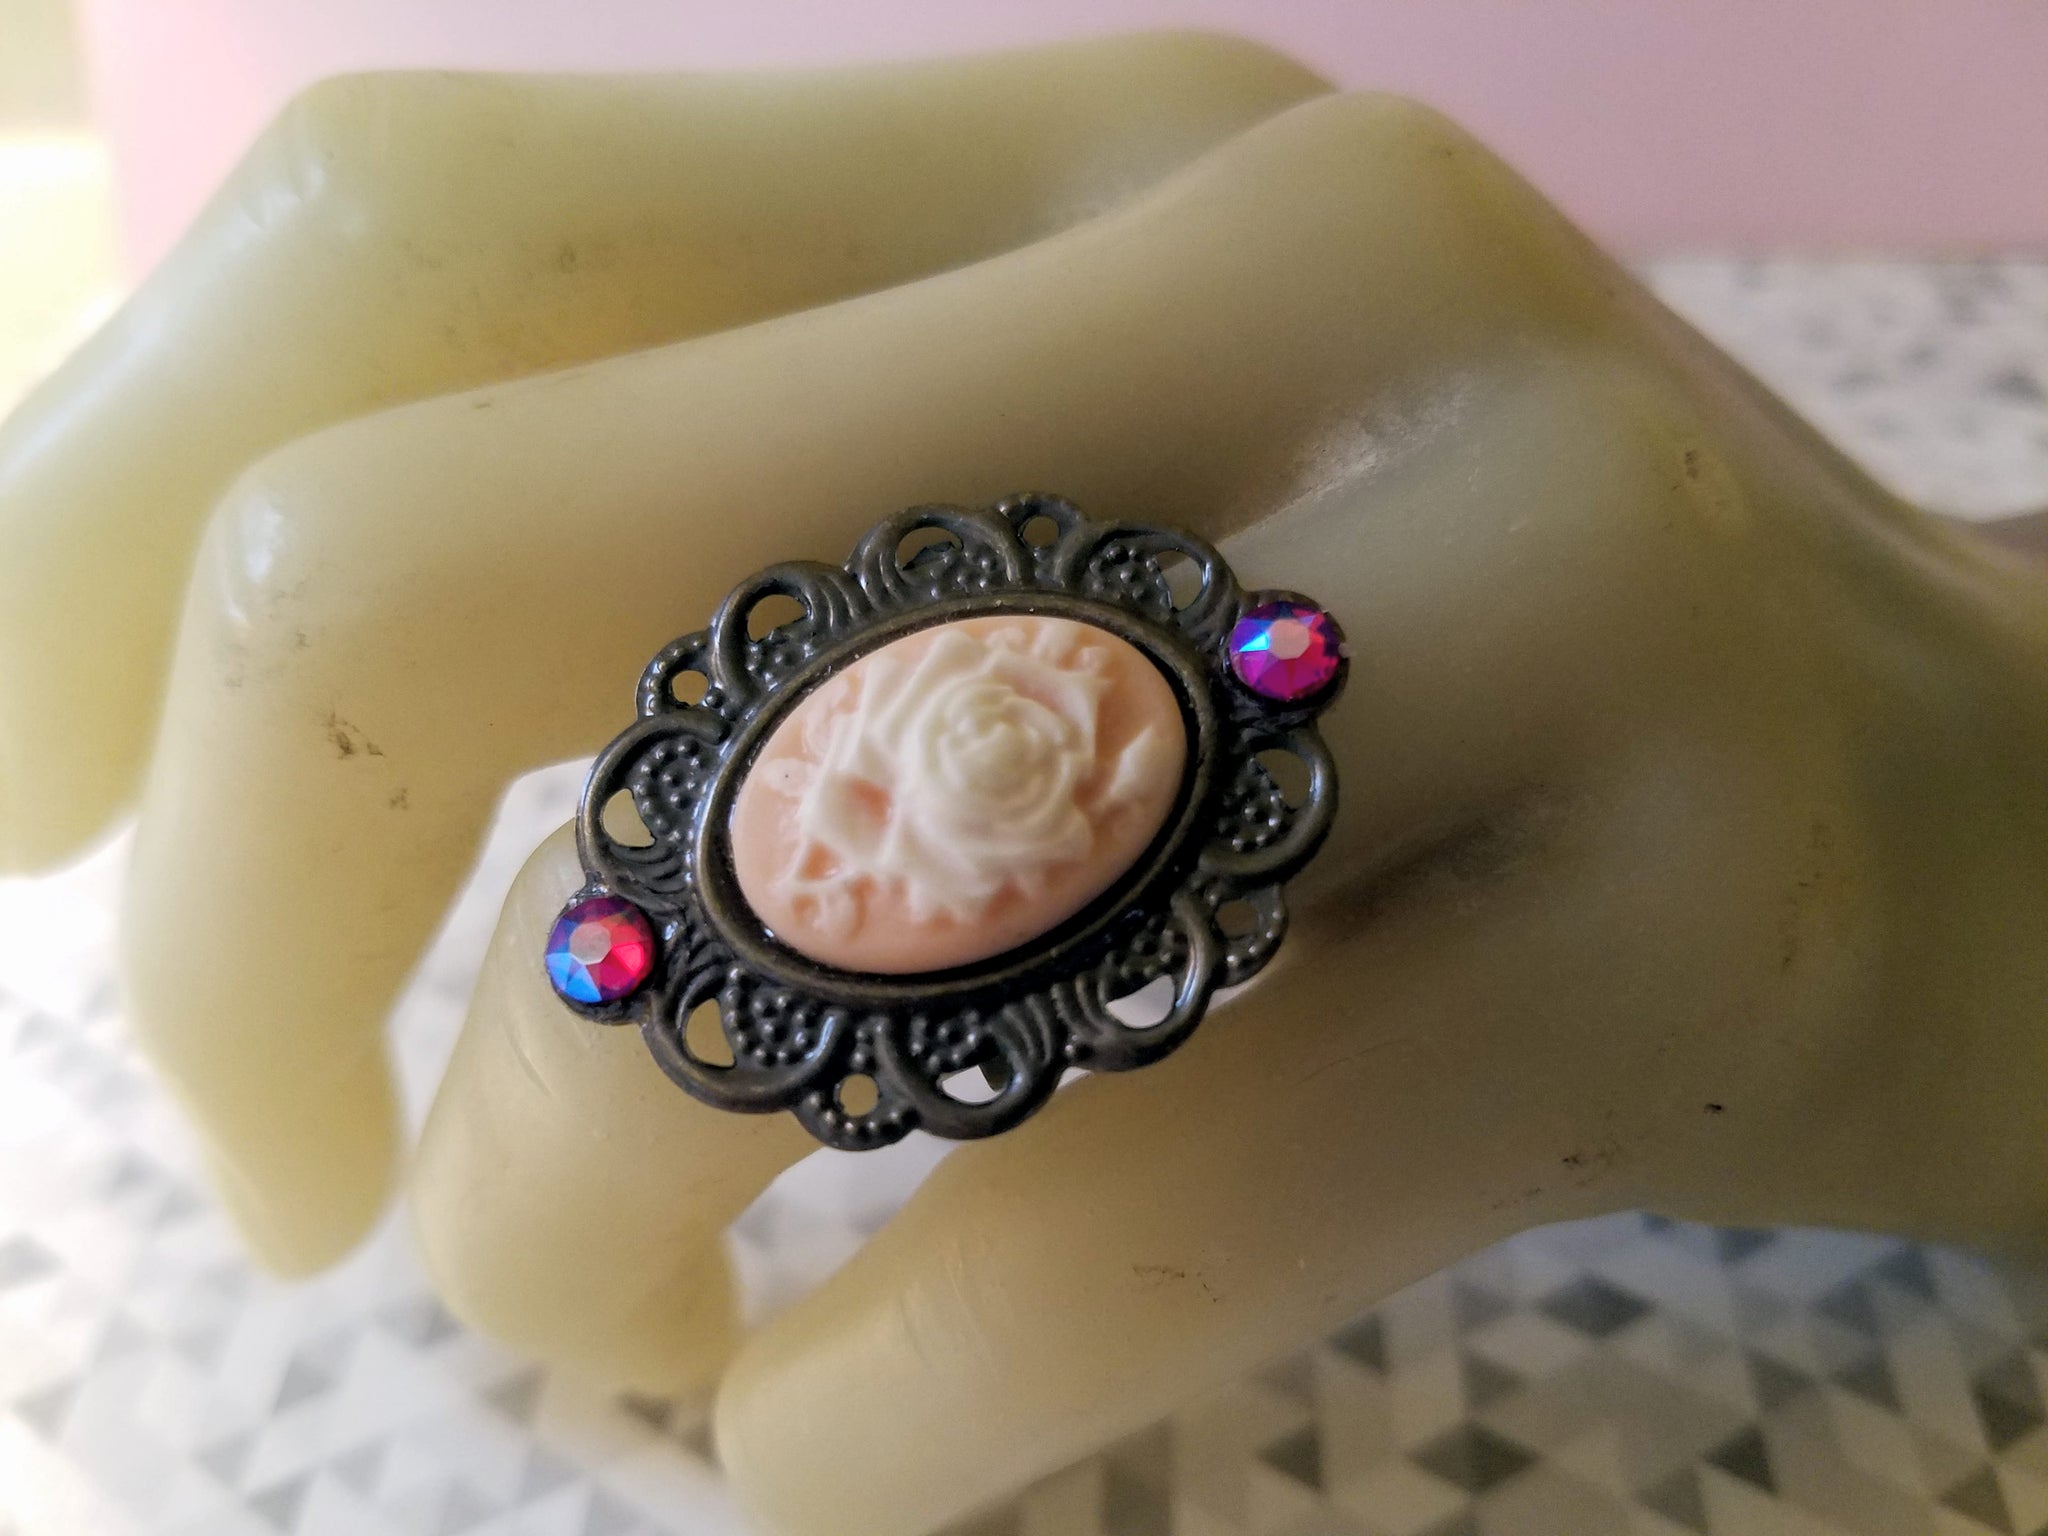 Floral Cameo Ring